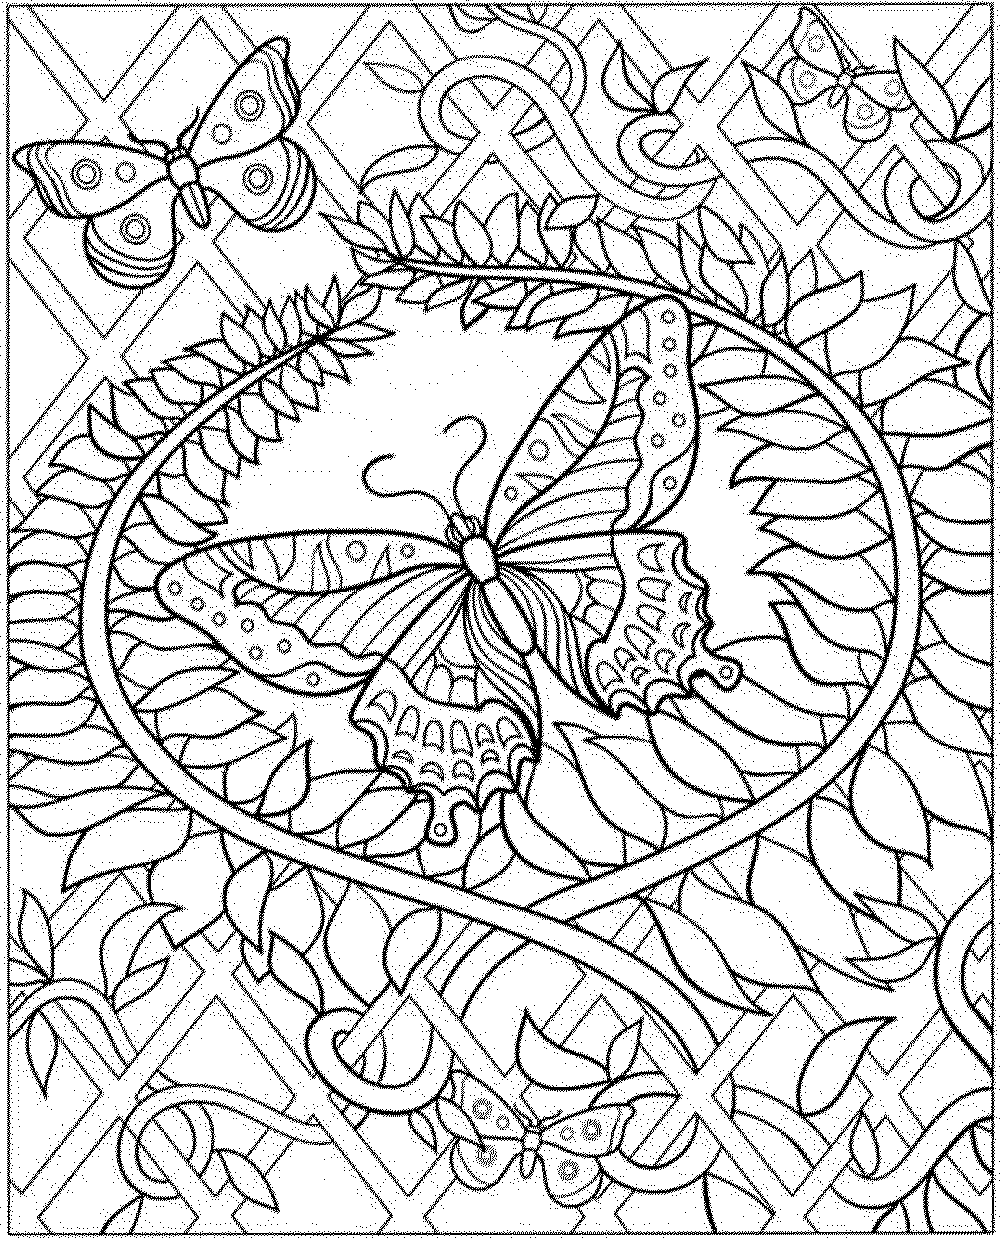 Difficult coloring page for adults